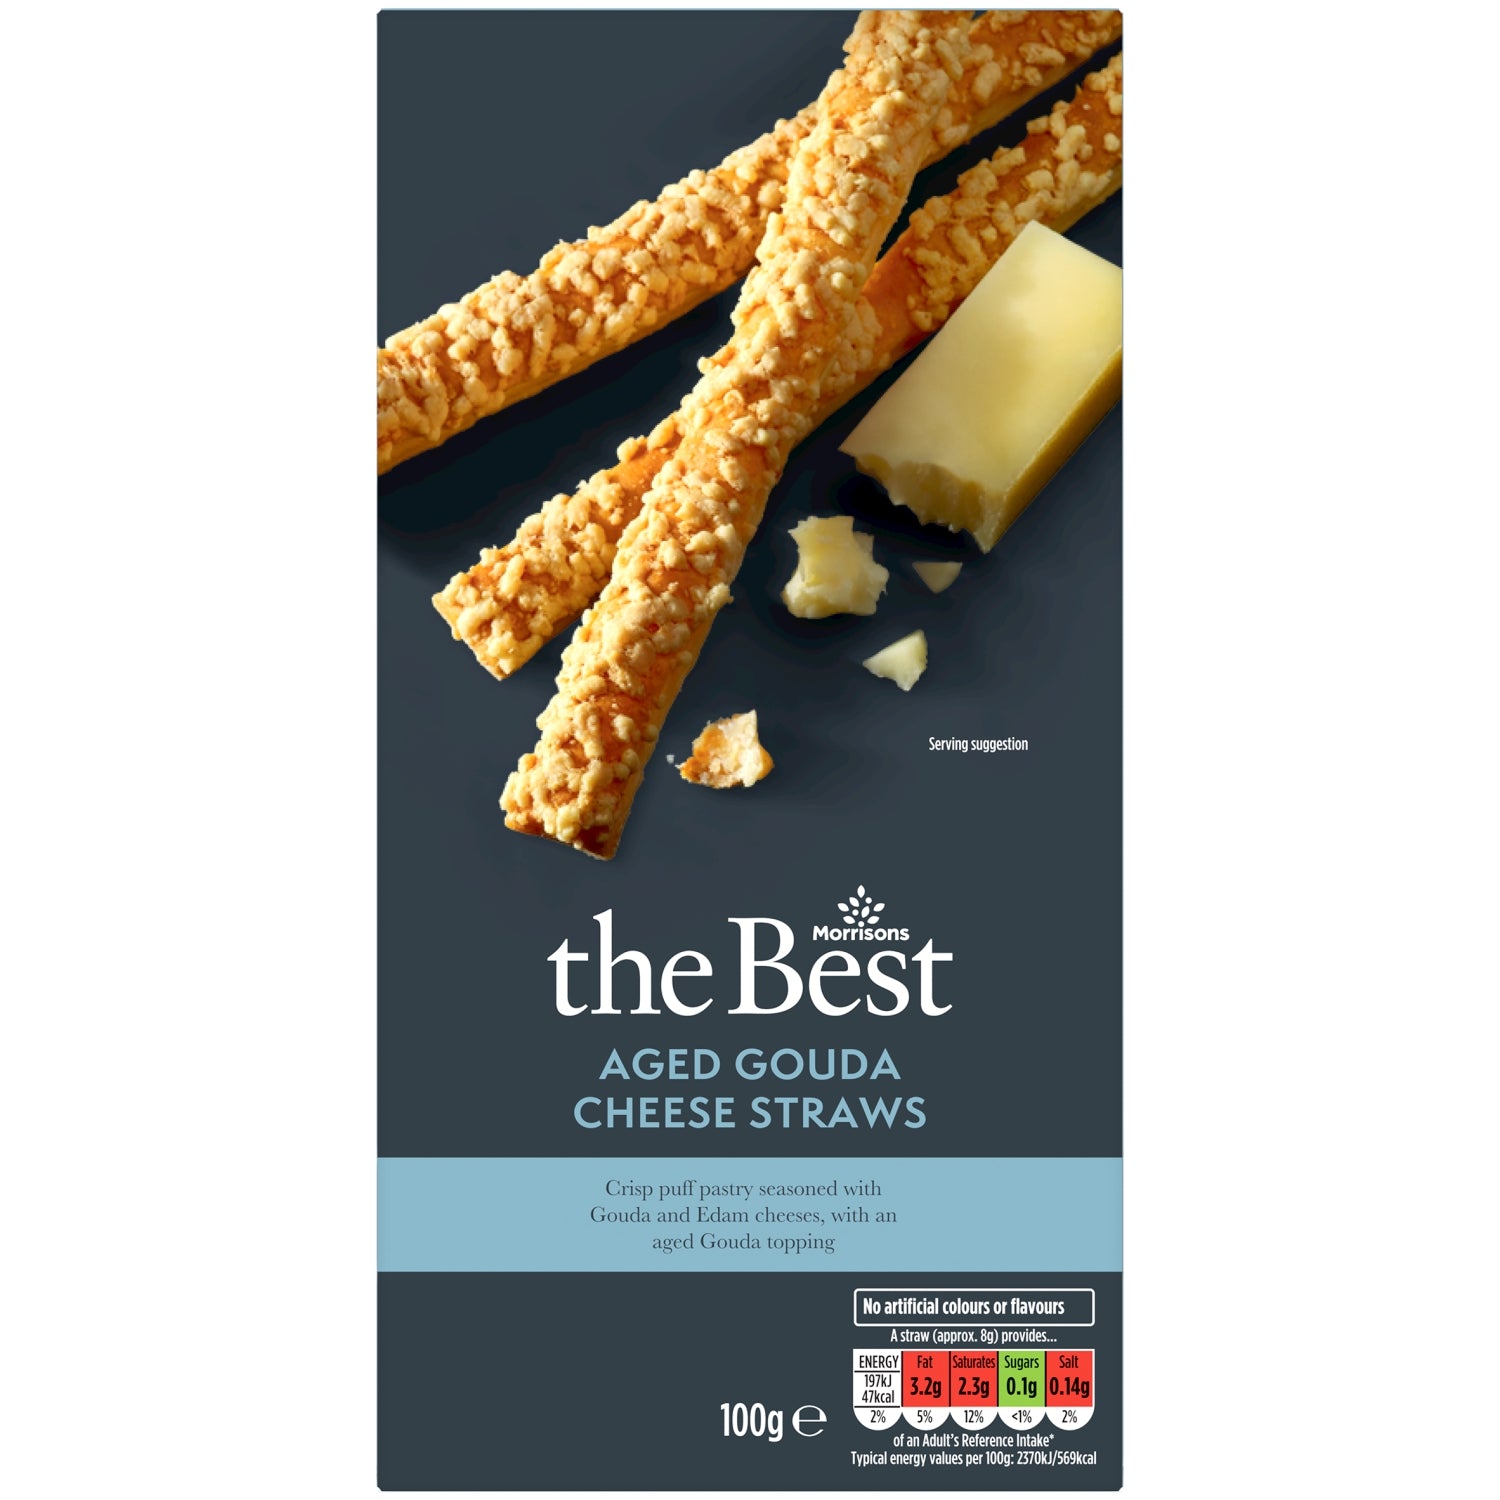 Morrisons The Best Aged Gouda Cheese Straws 100g